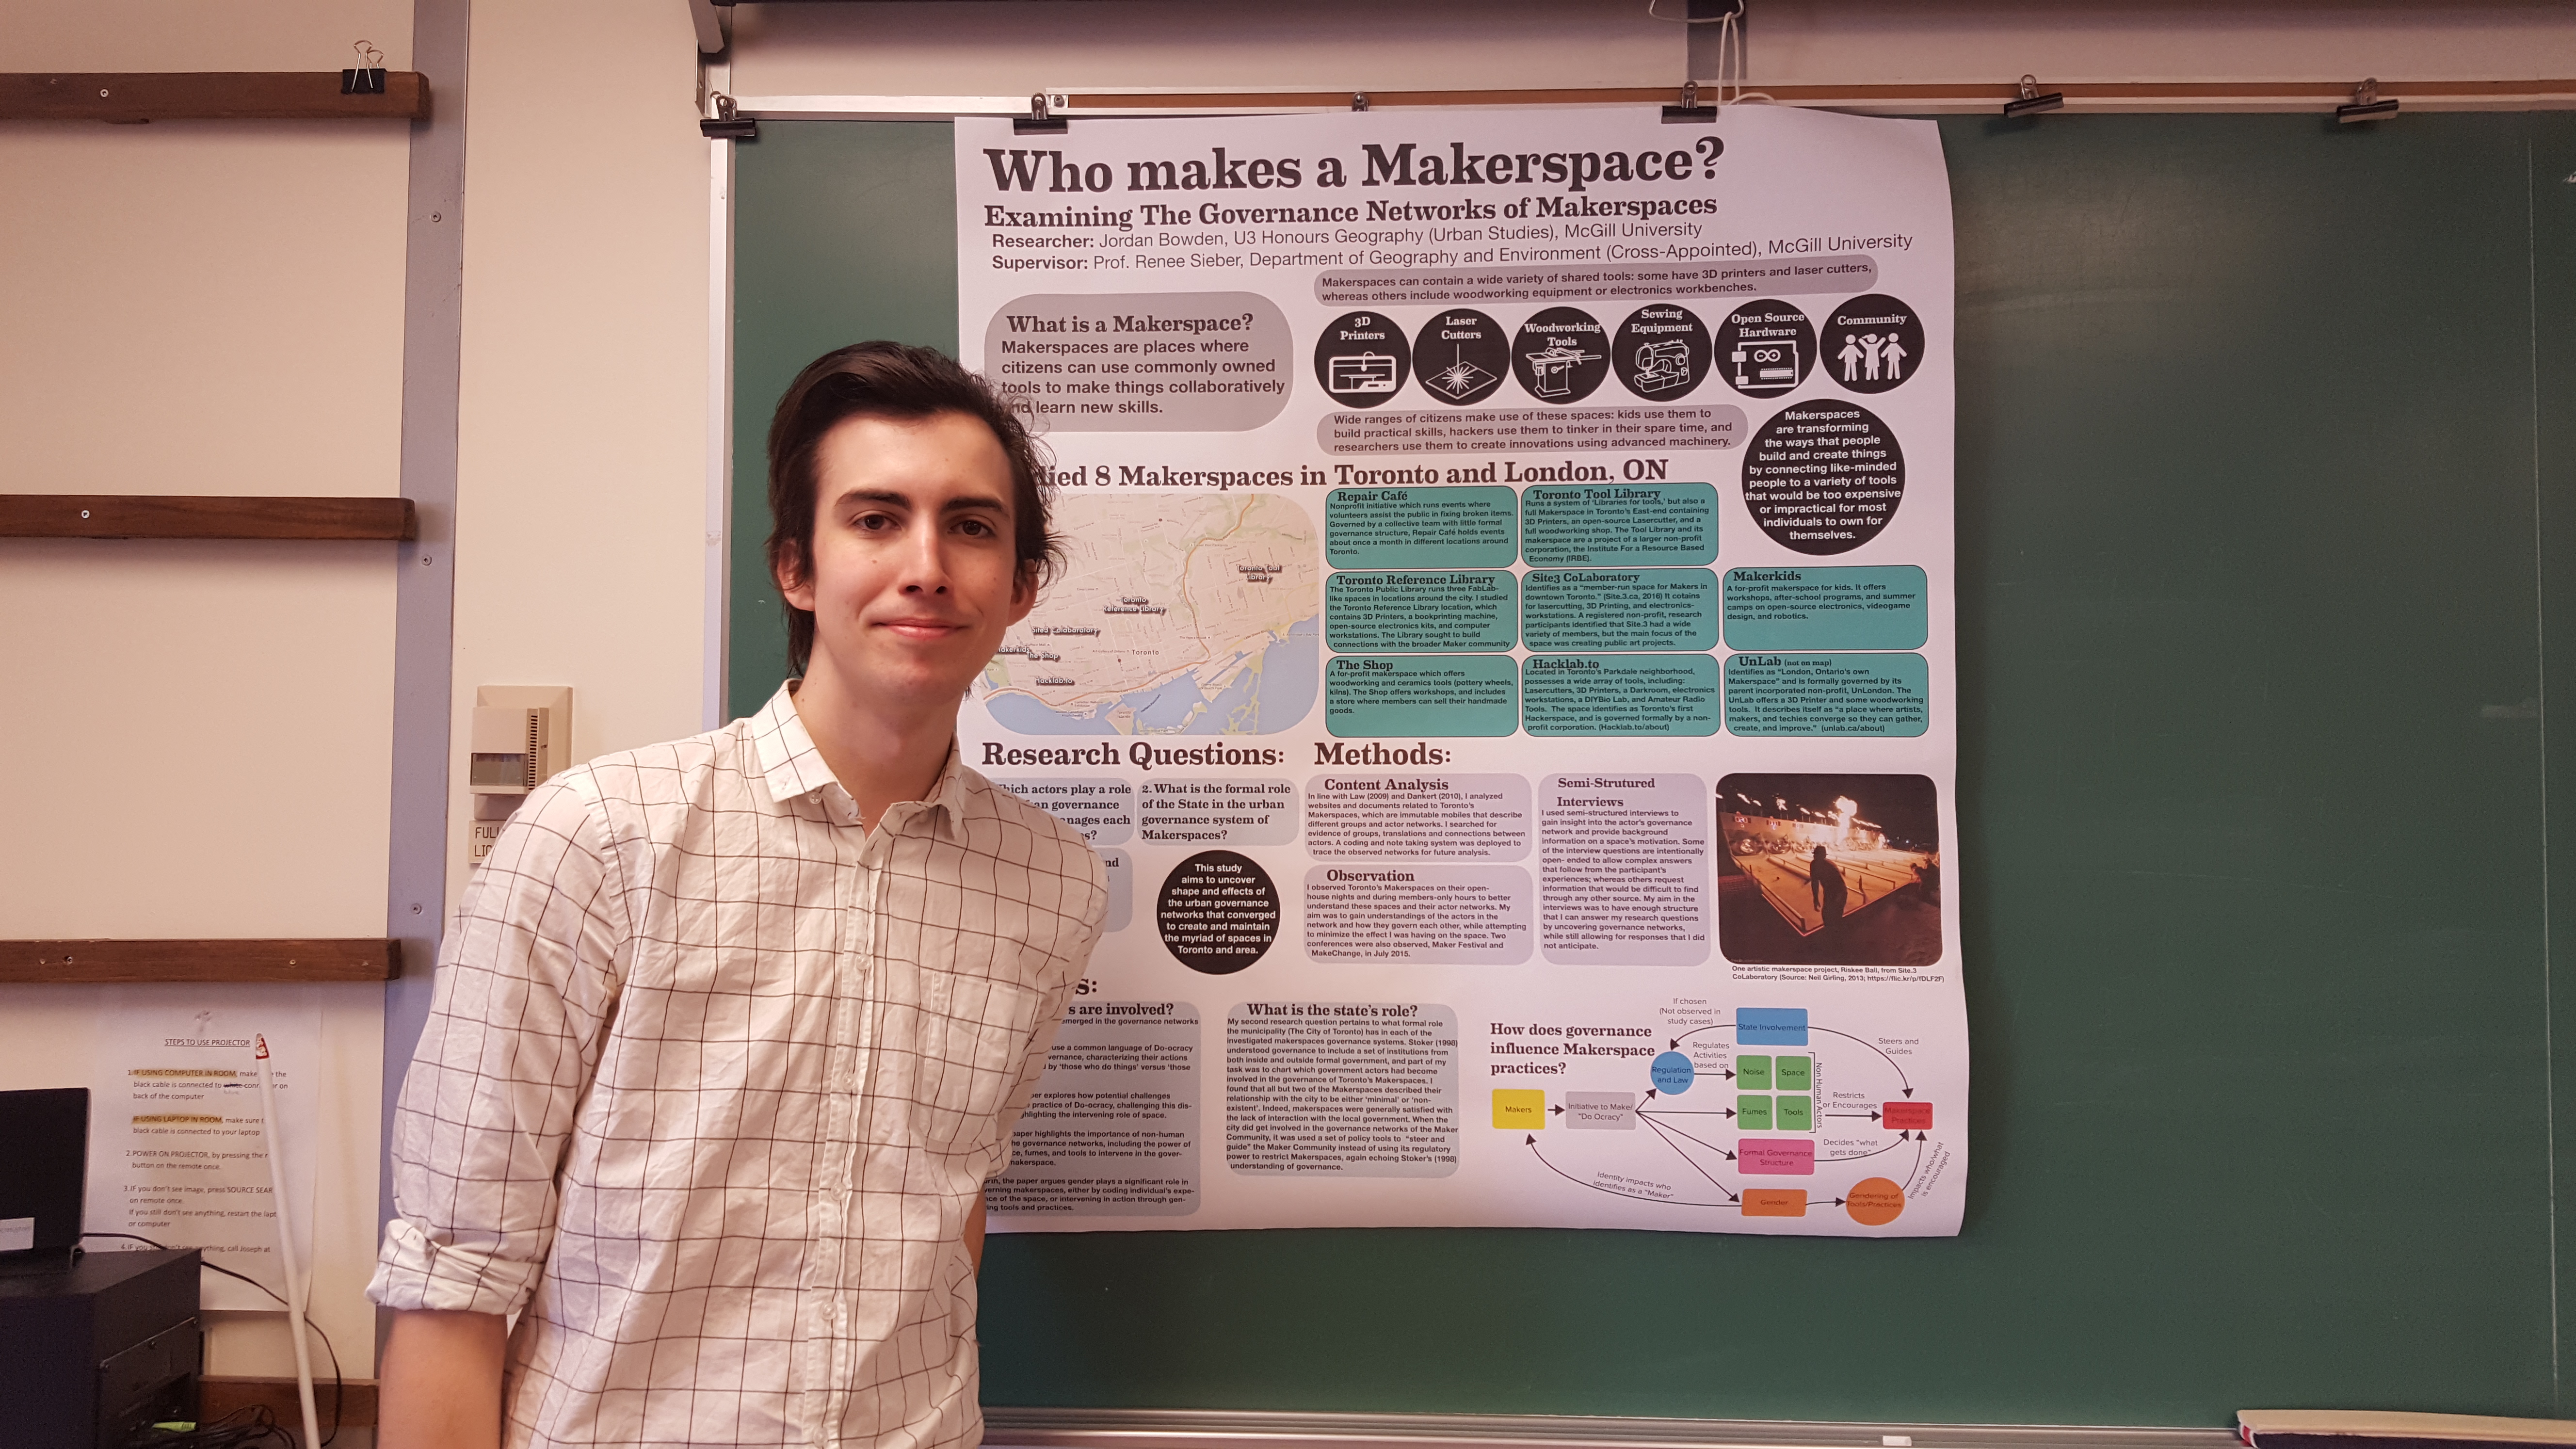 A McGill University undergraduate has undertaken unique research on the governance of Toronto's Makerspaces as his honours thesis project.